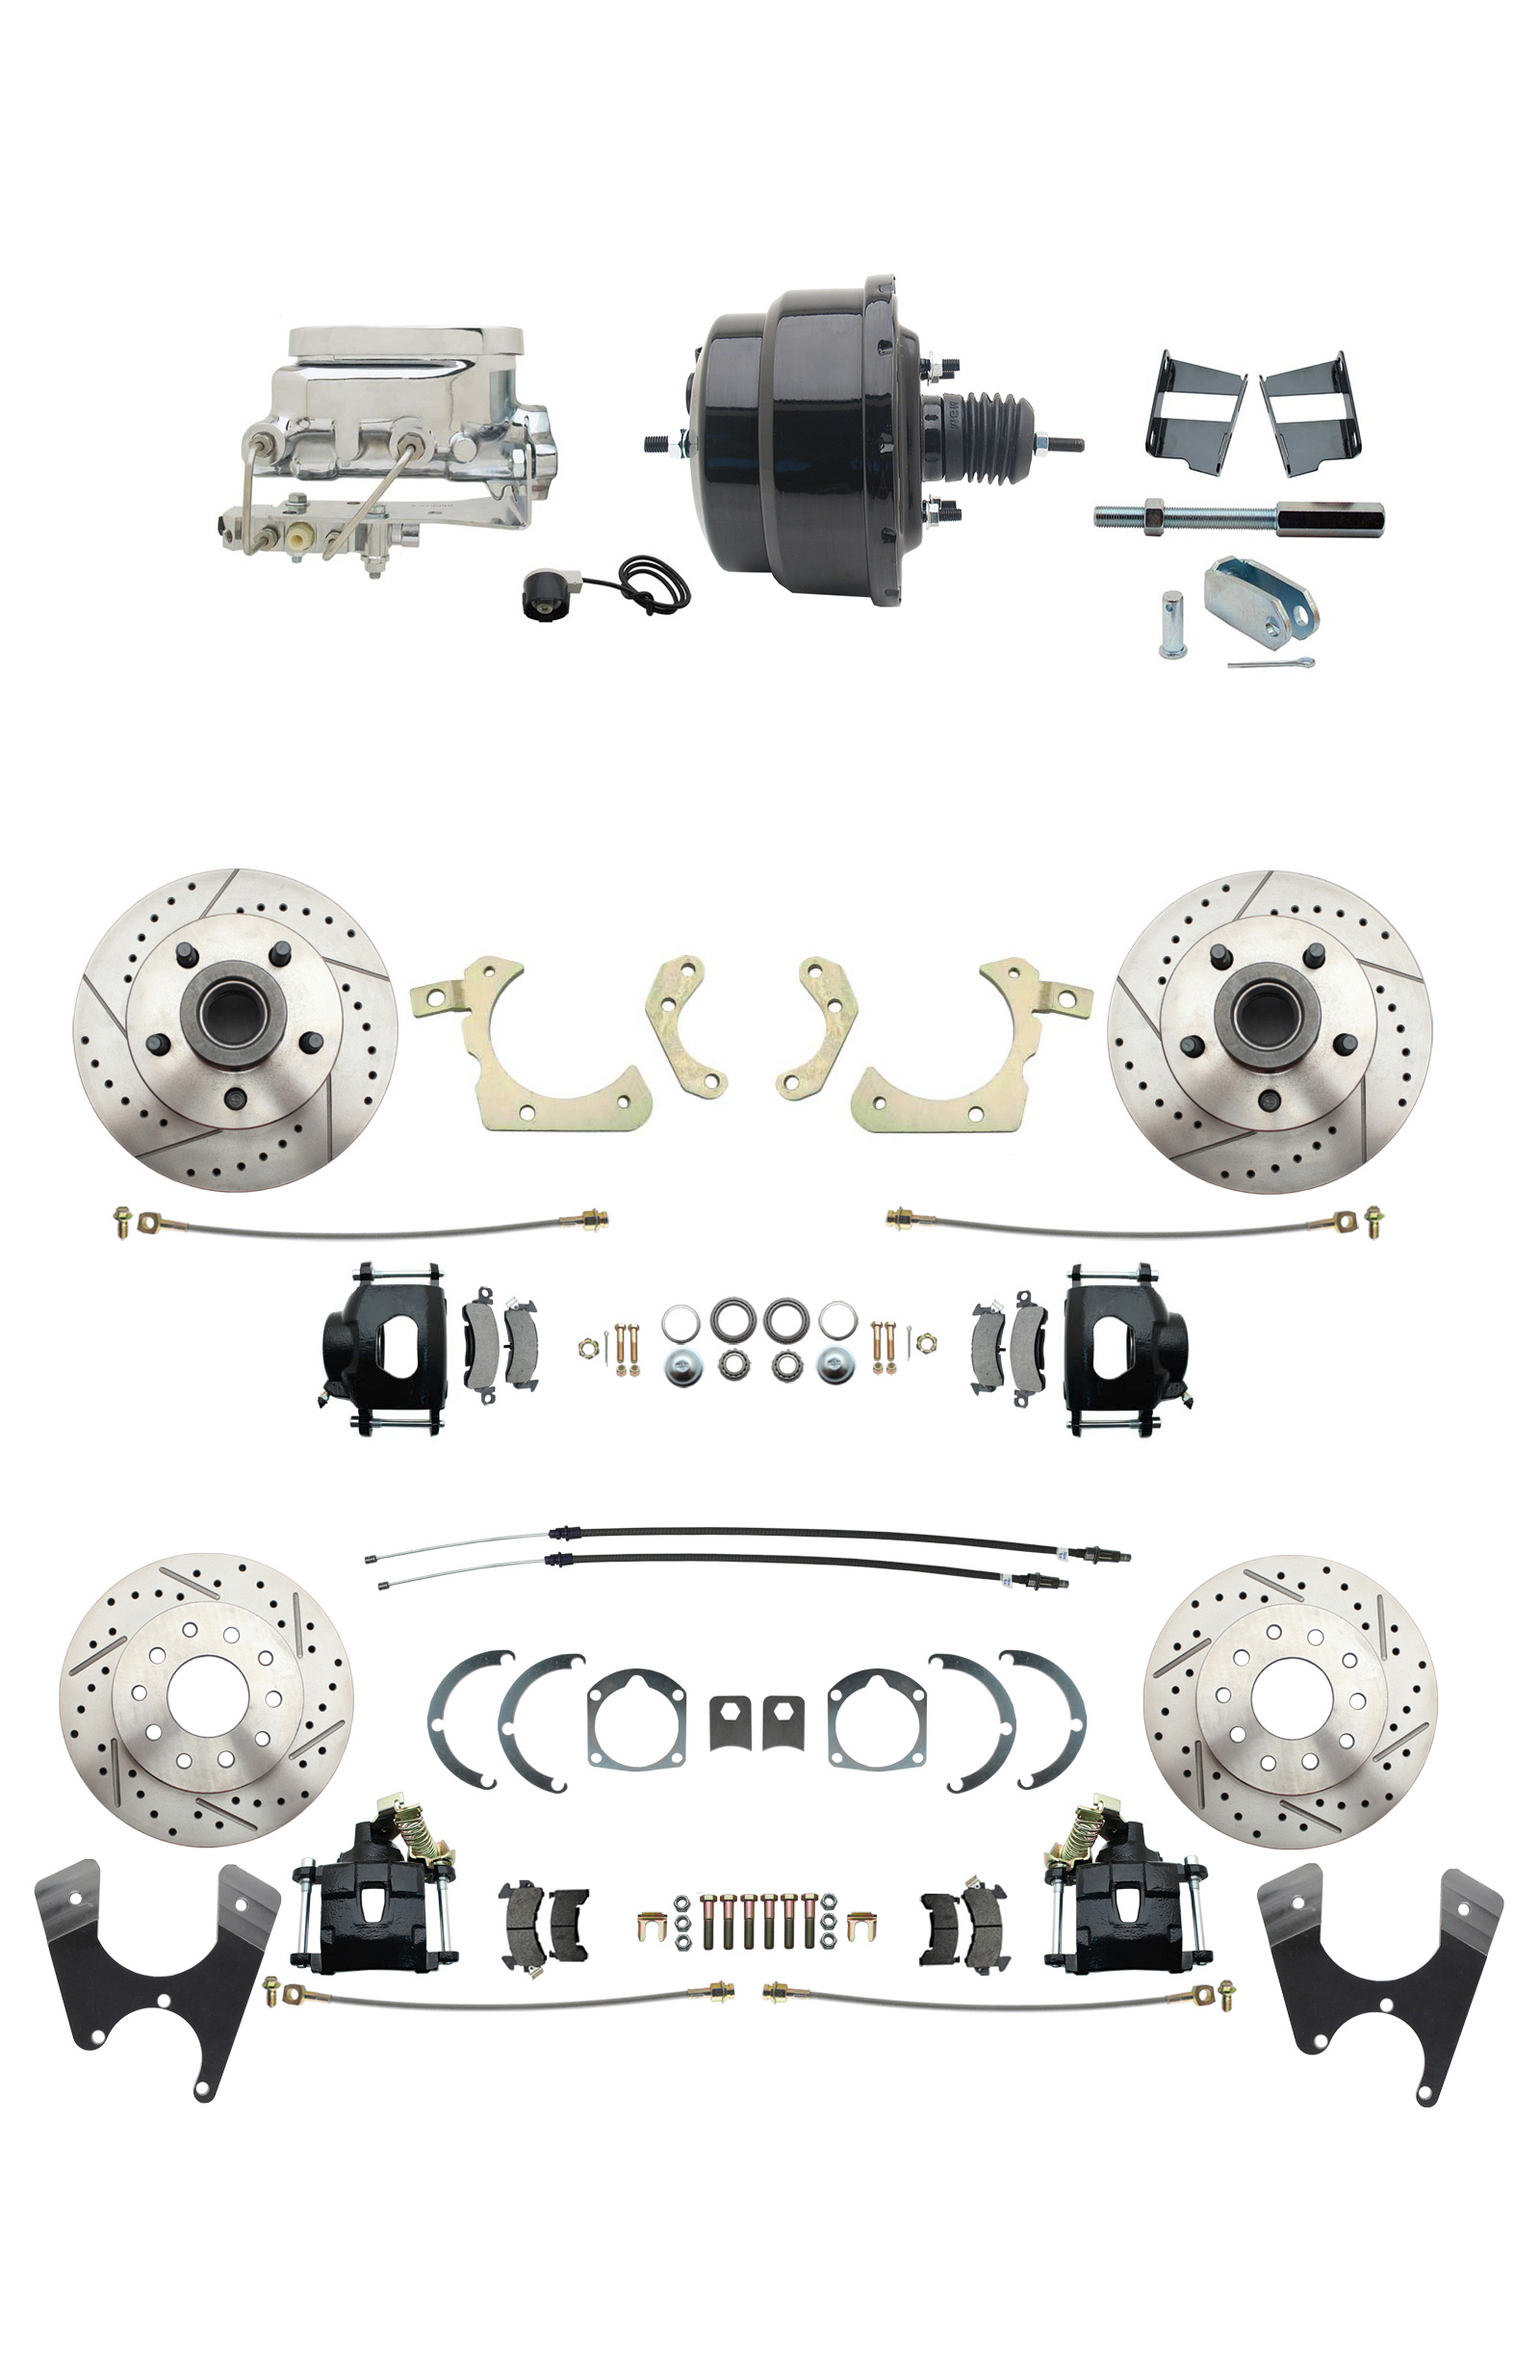 1959-1964 GM Full Size Front & Rear Power Disc Brake Kit Black Powder Coated Calipers Drilled/Slotted Rotors (Impala, Bel Air, Biscayne) & 8 Dual Powder Coated Black Booster Conversion Kit W/ Chrome Flat Top Master Cyli